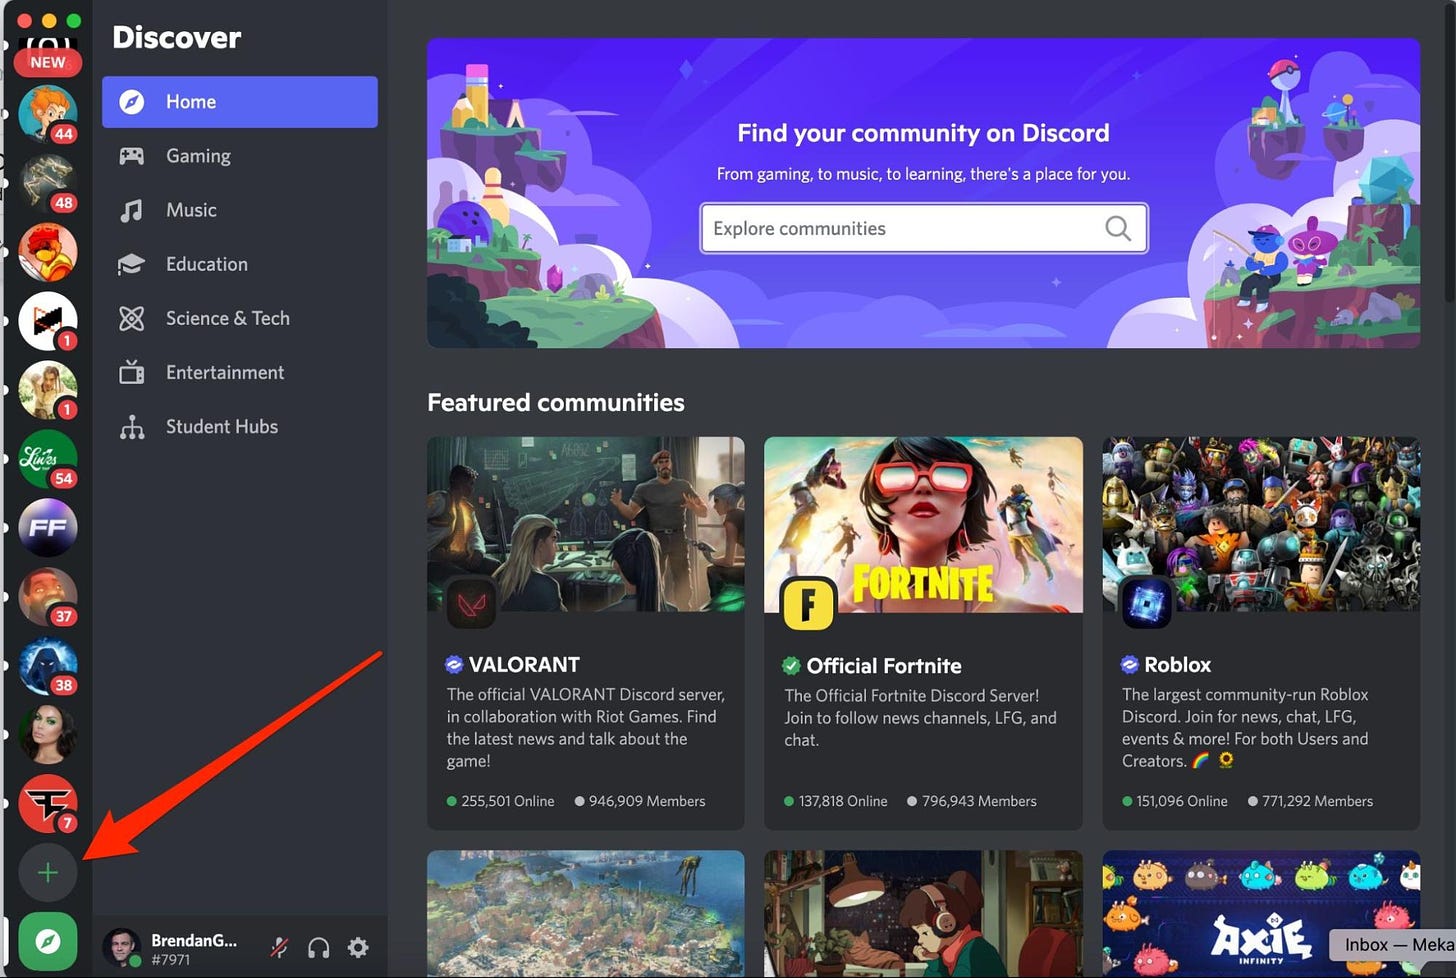 Should Brands Invest in a Discord Community? | Sprout Social